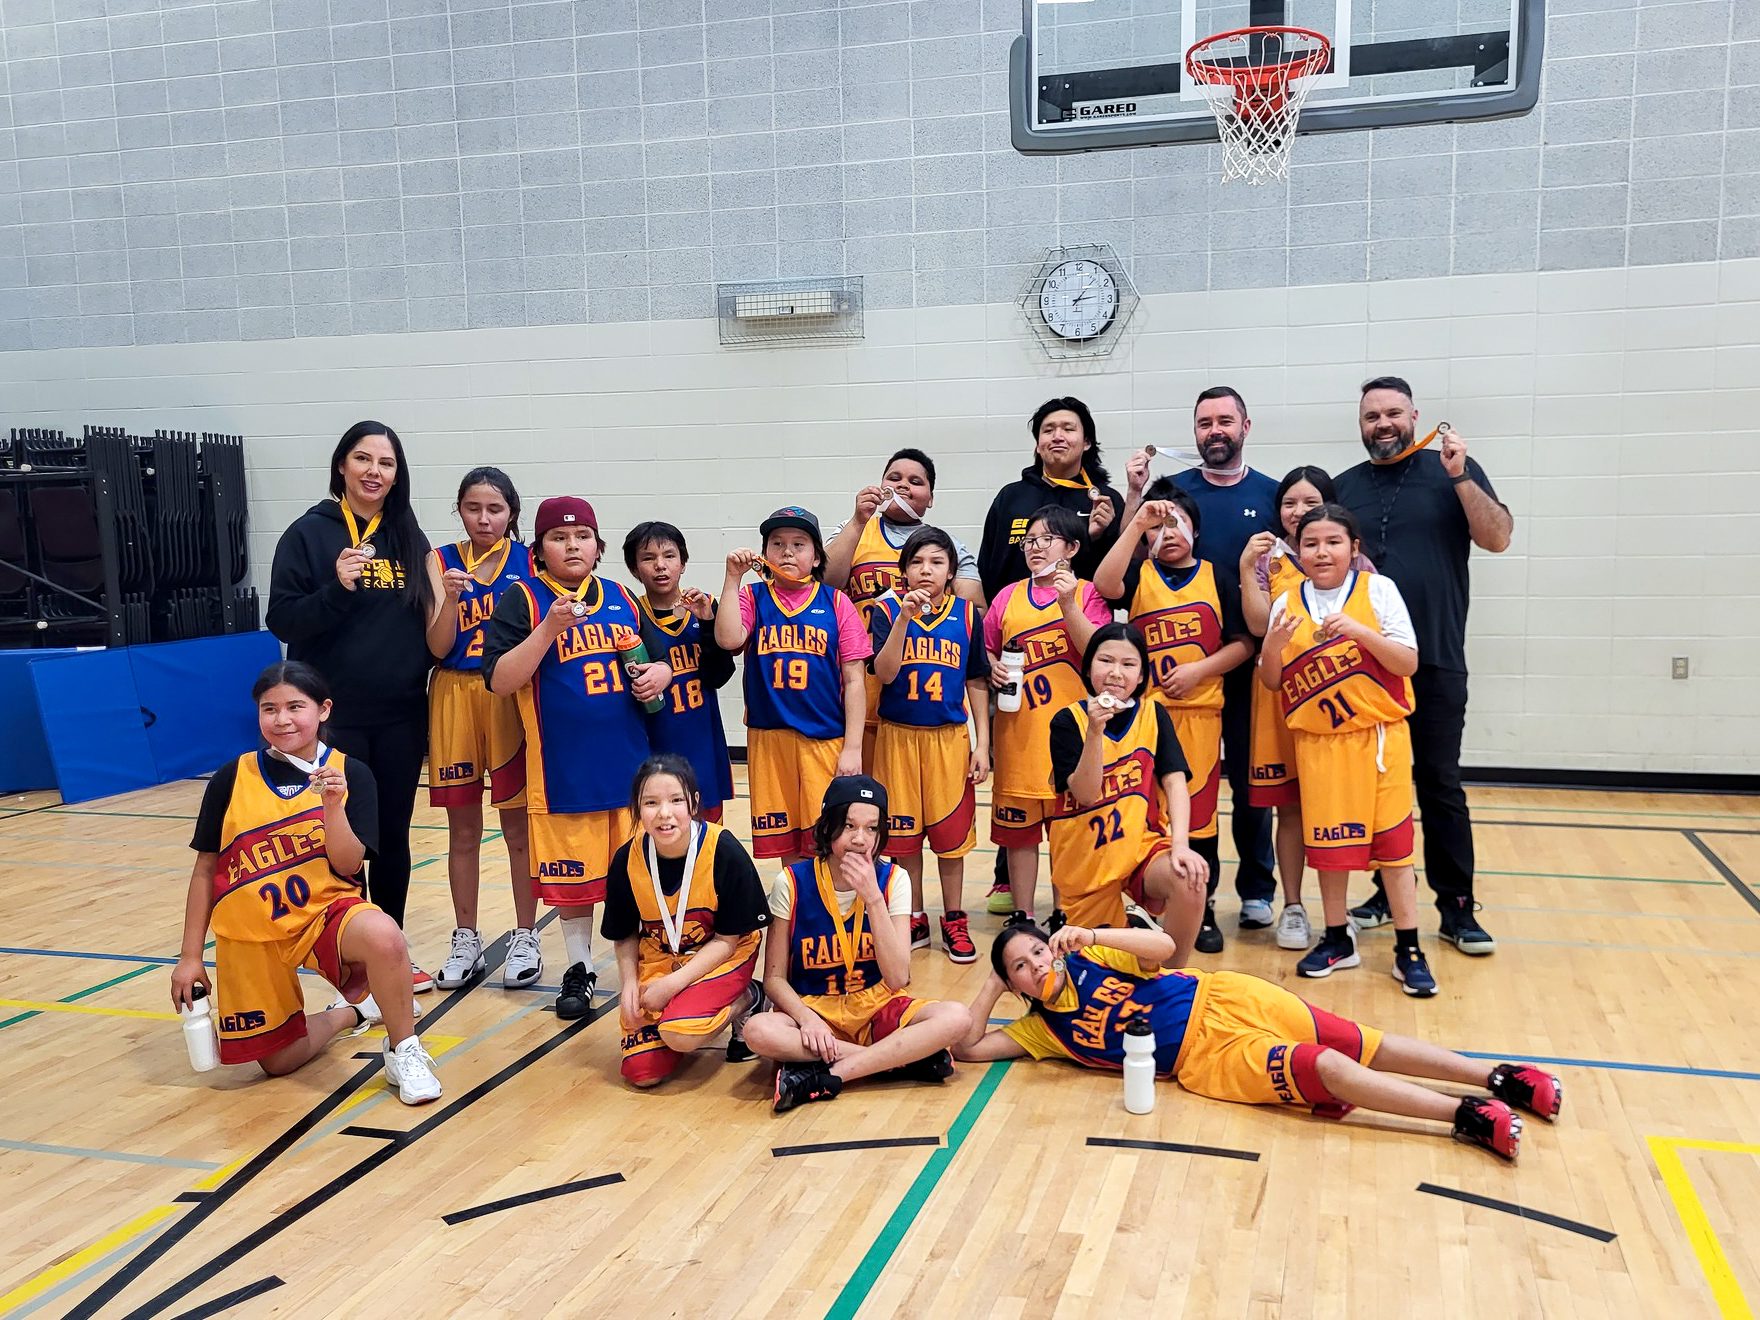 A basketball team wearing gold and blue post with medals. Taken during an Everybody Plays Leagues of Play event.